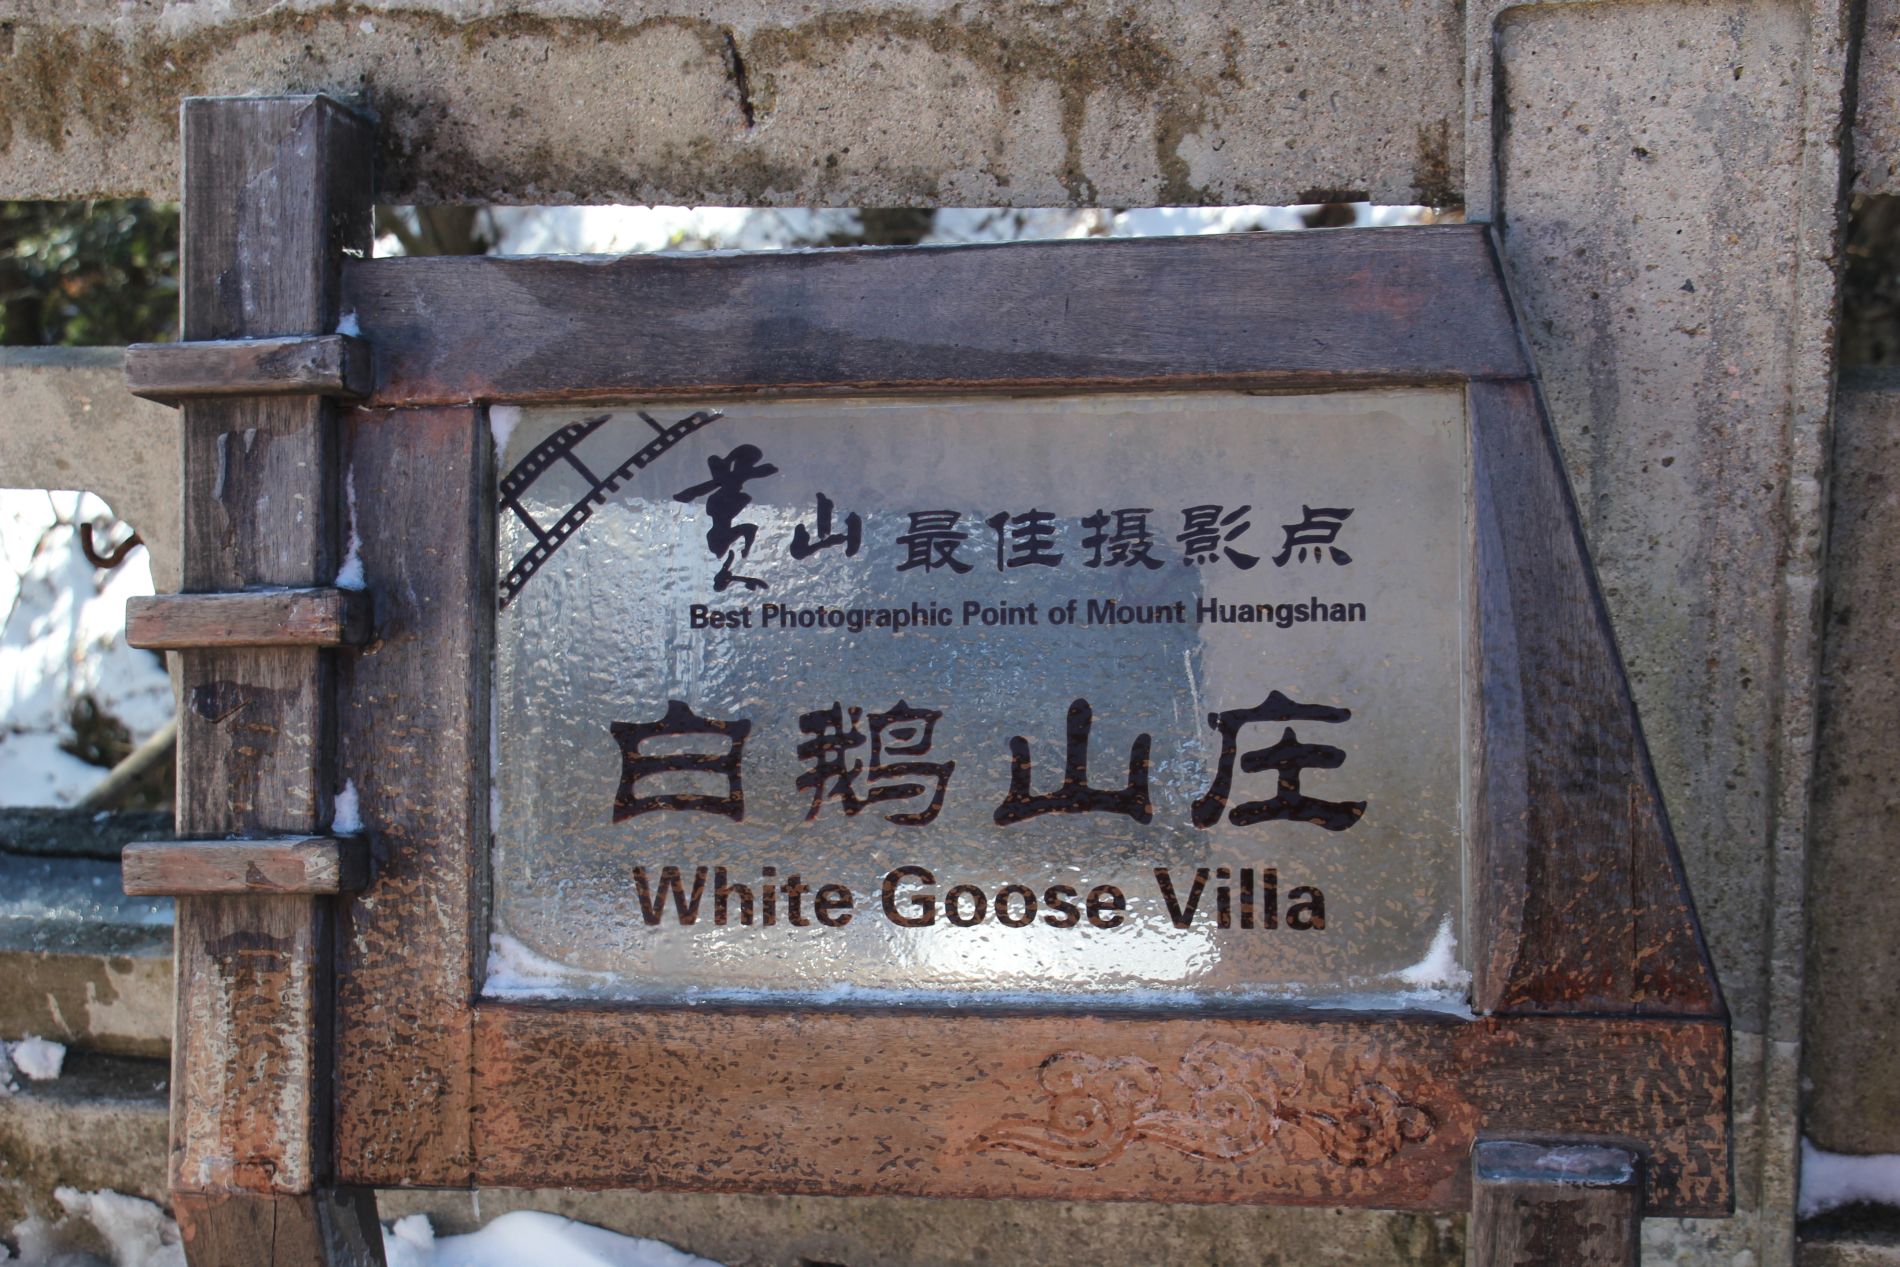 A sign advertises White Goose Villa as the Best Photographic Point of Mount Huangshan.